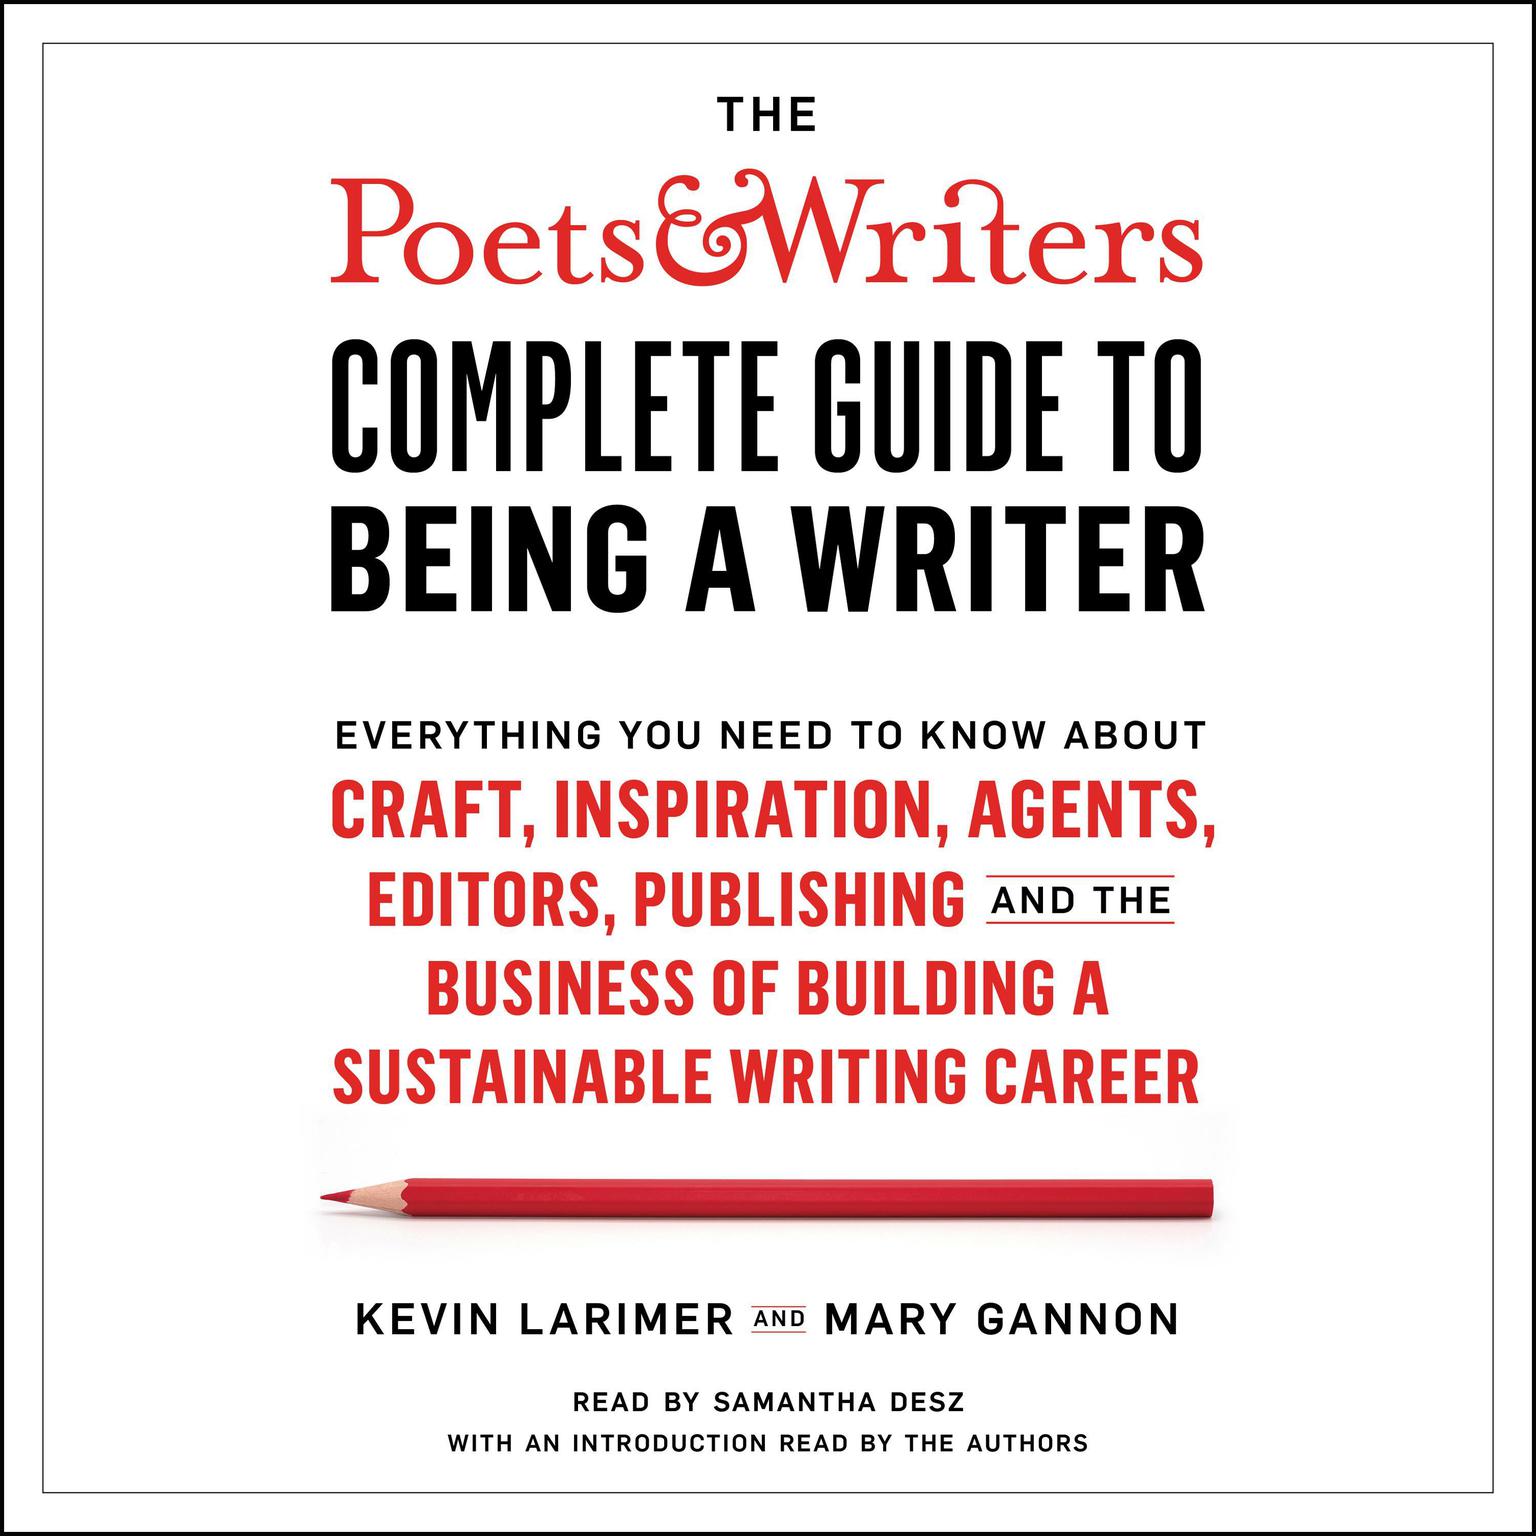 The Poets & Writers Complete Guide to Being a Writer: Everything You Need to Know About Craft, Inspiration, Agents, Editors, Publishing, and the Business of Building a Sustainable Writing Career Audiobook, by Kevin Larimer